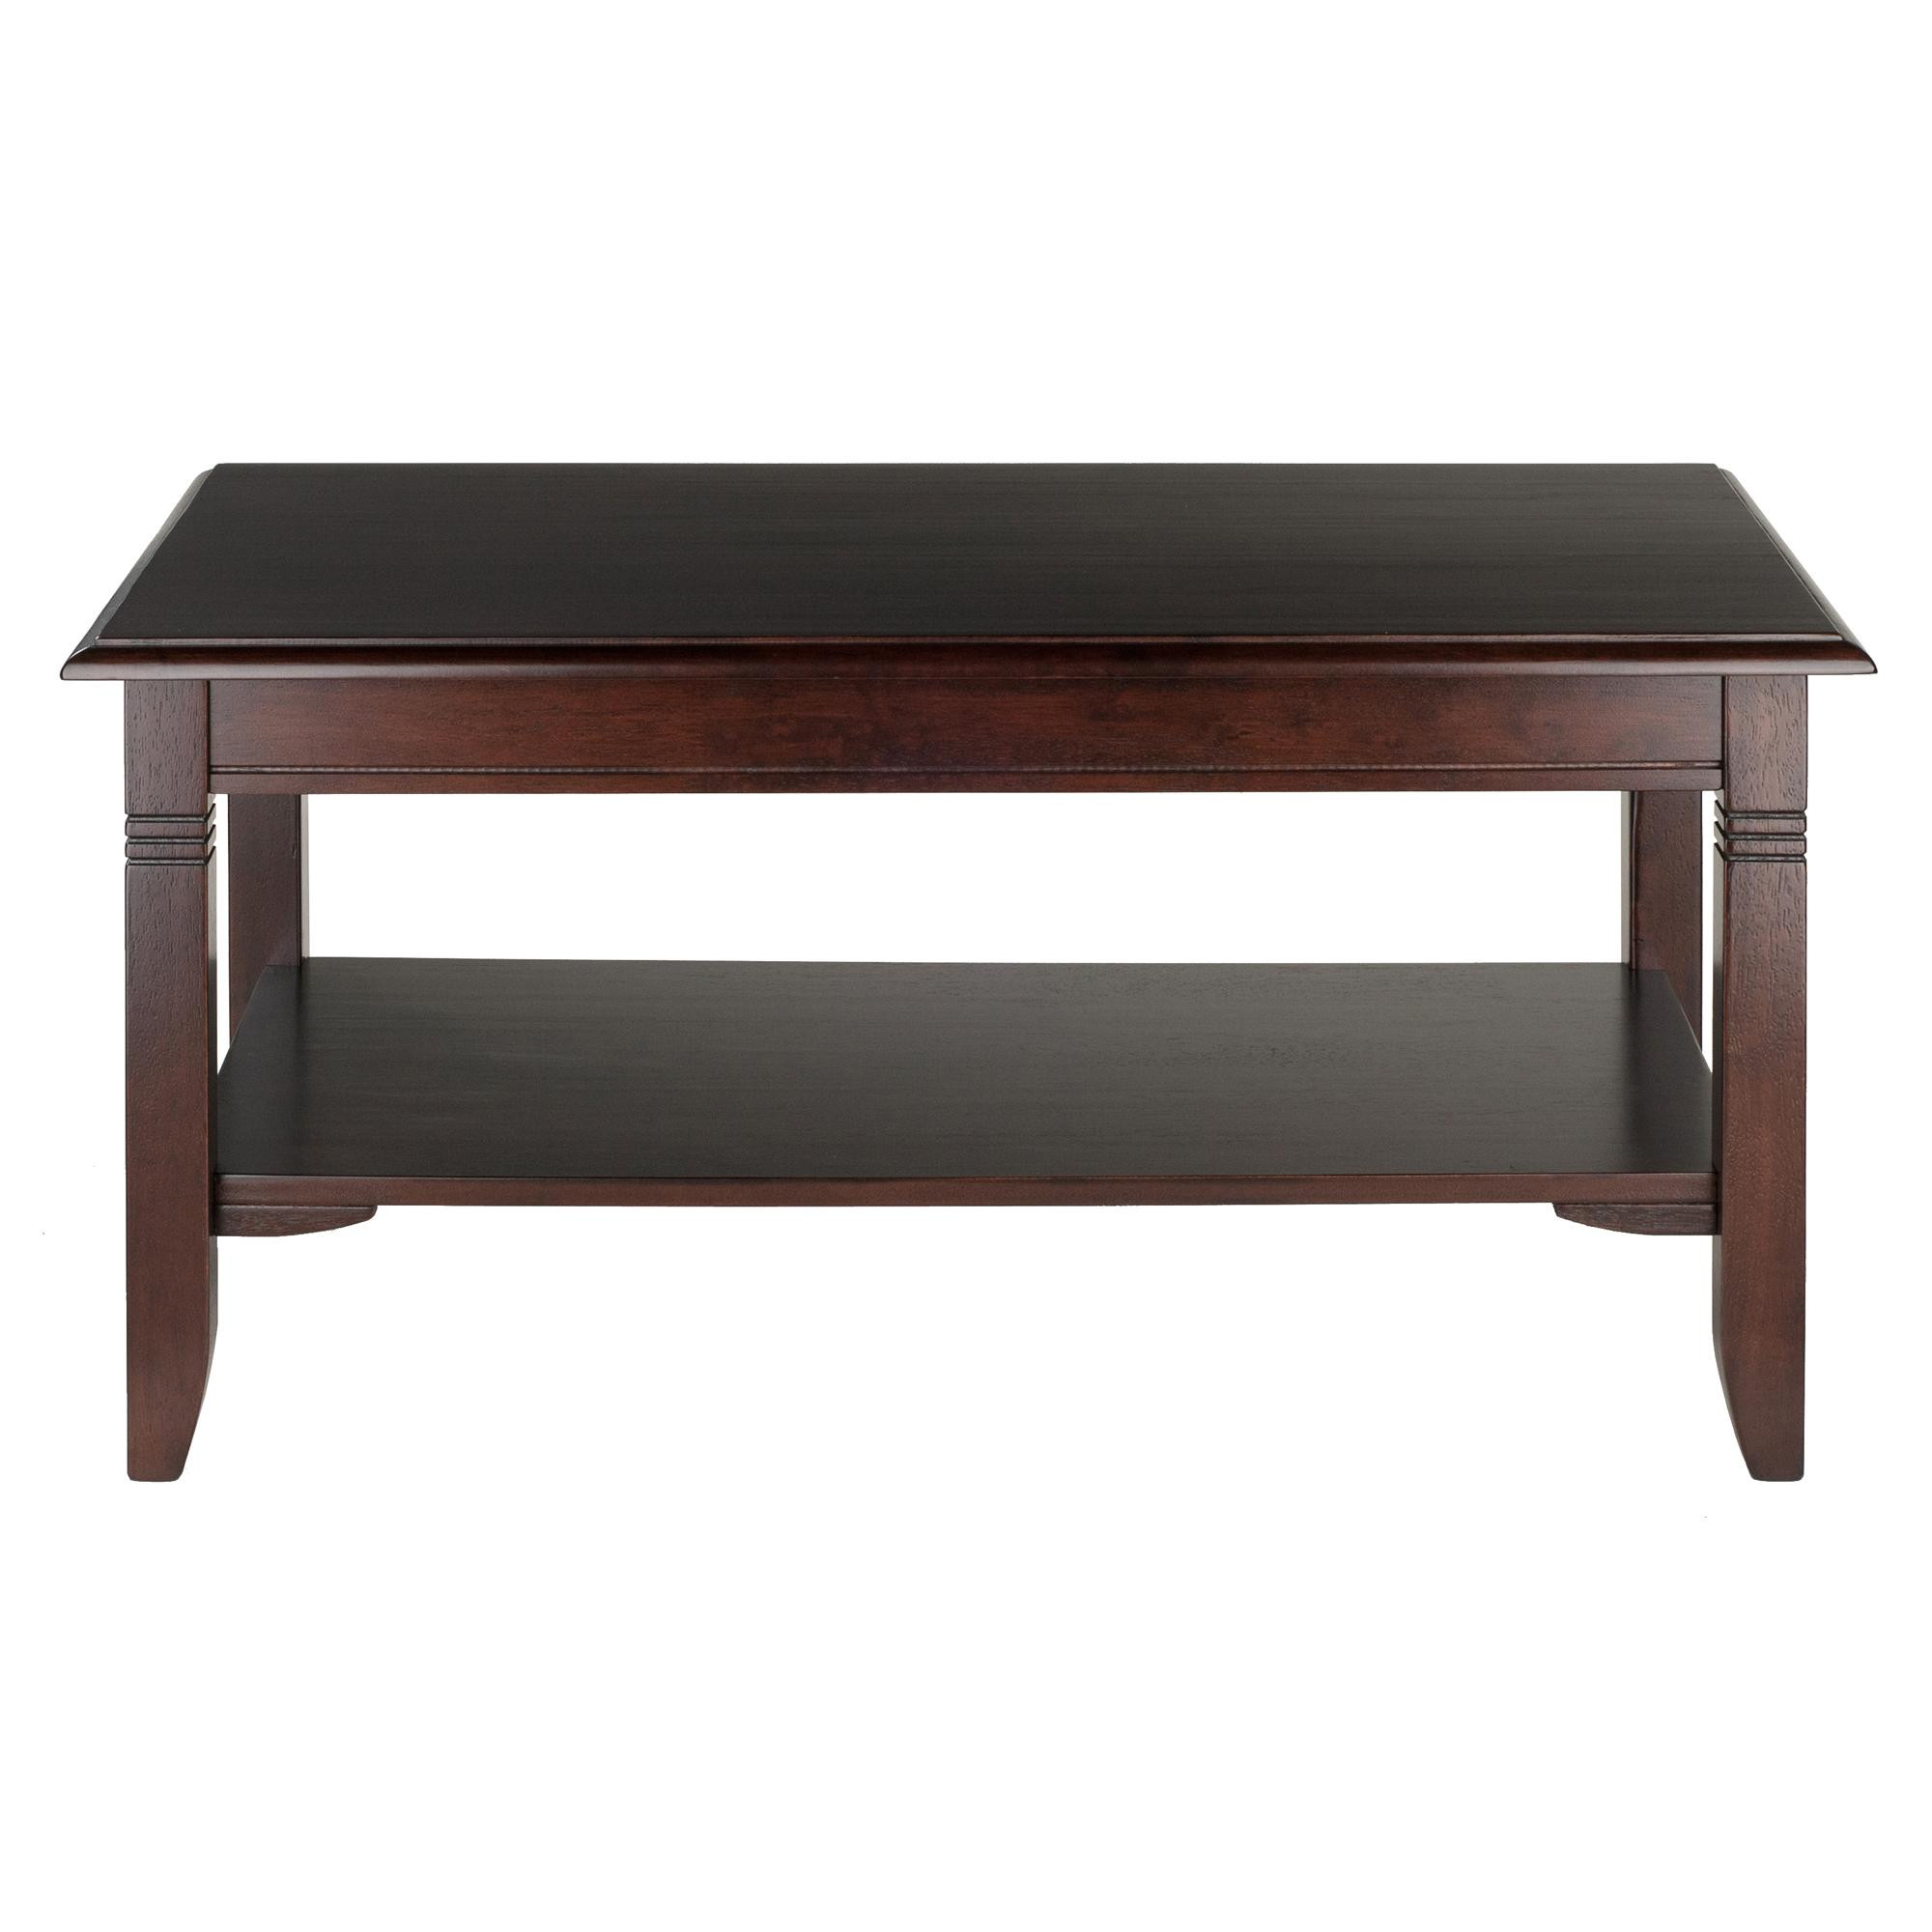 Best ideas about Amazon Coffee Table
. Save or Pin Amazon Winsome Wood Nolan Coffee Table Kitchen & Dining Now.